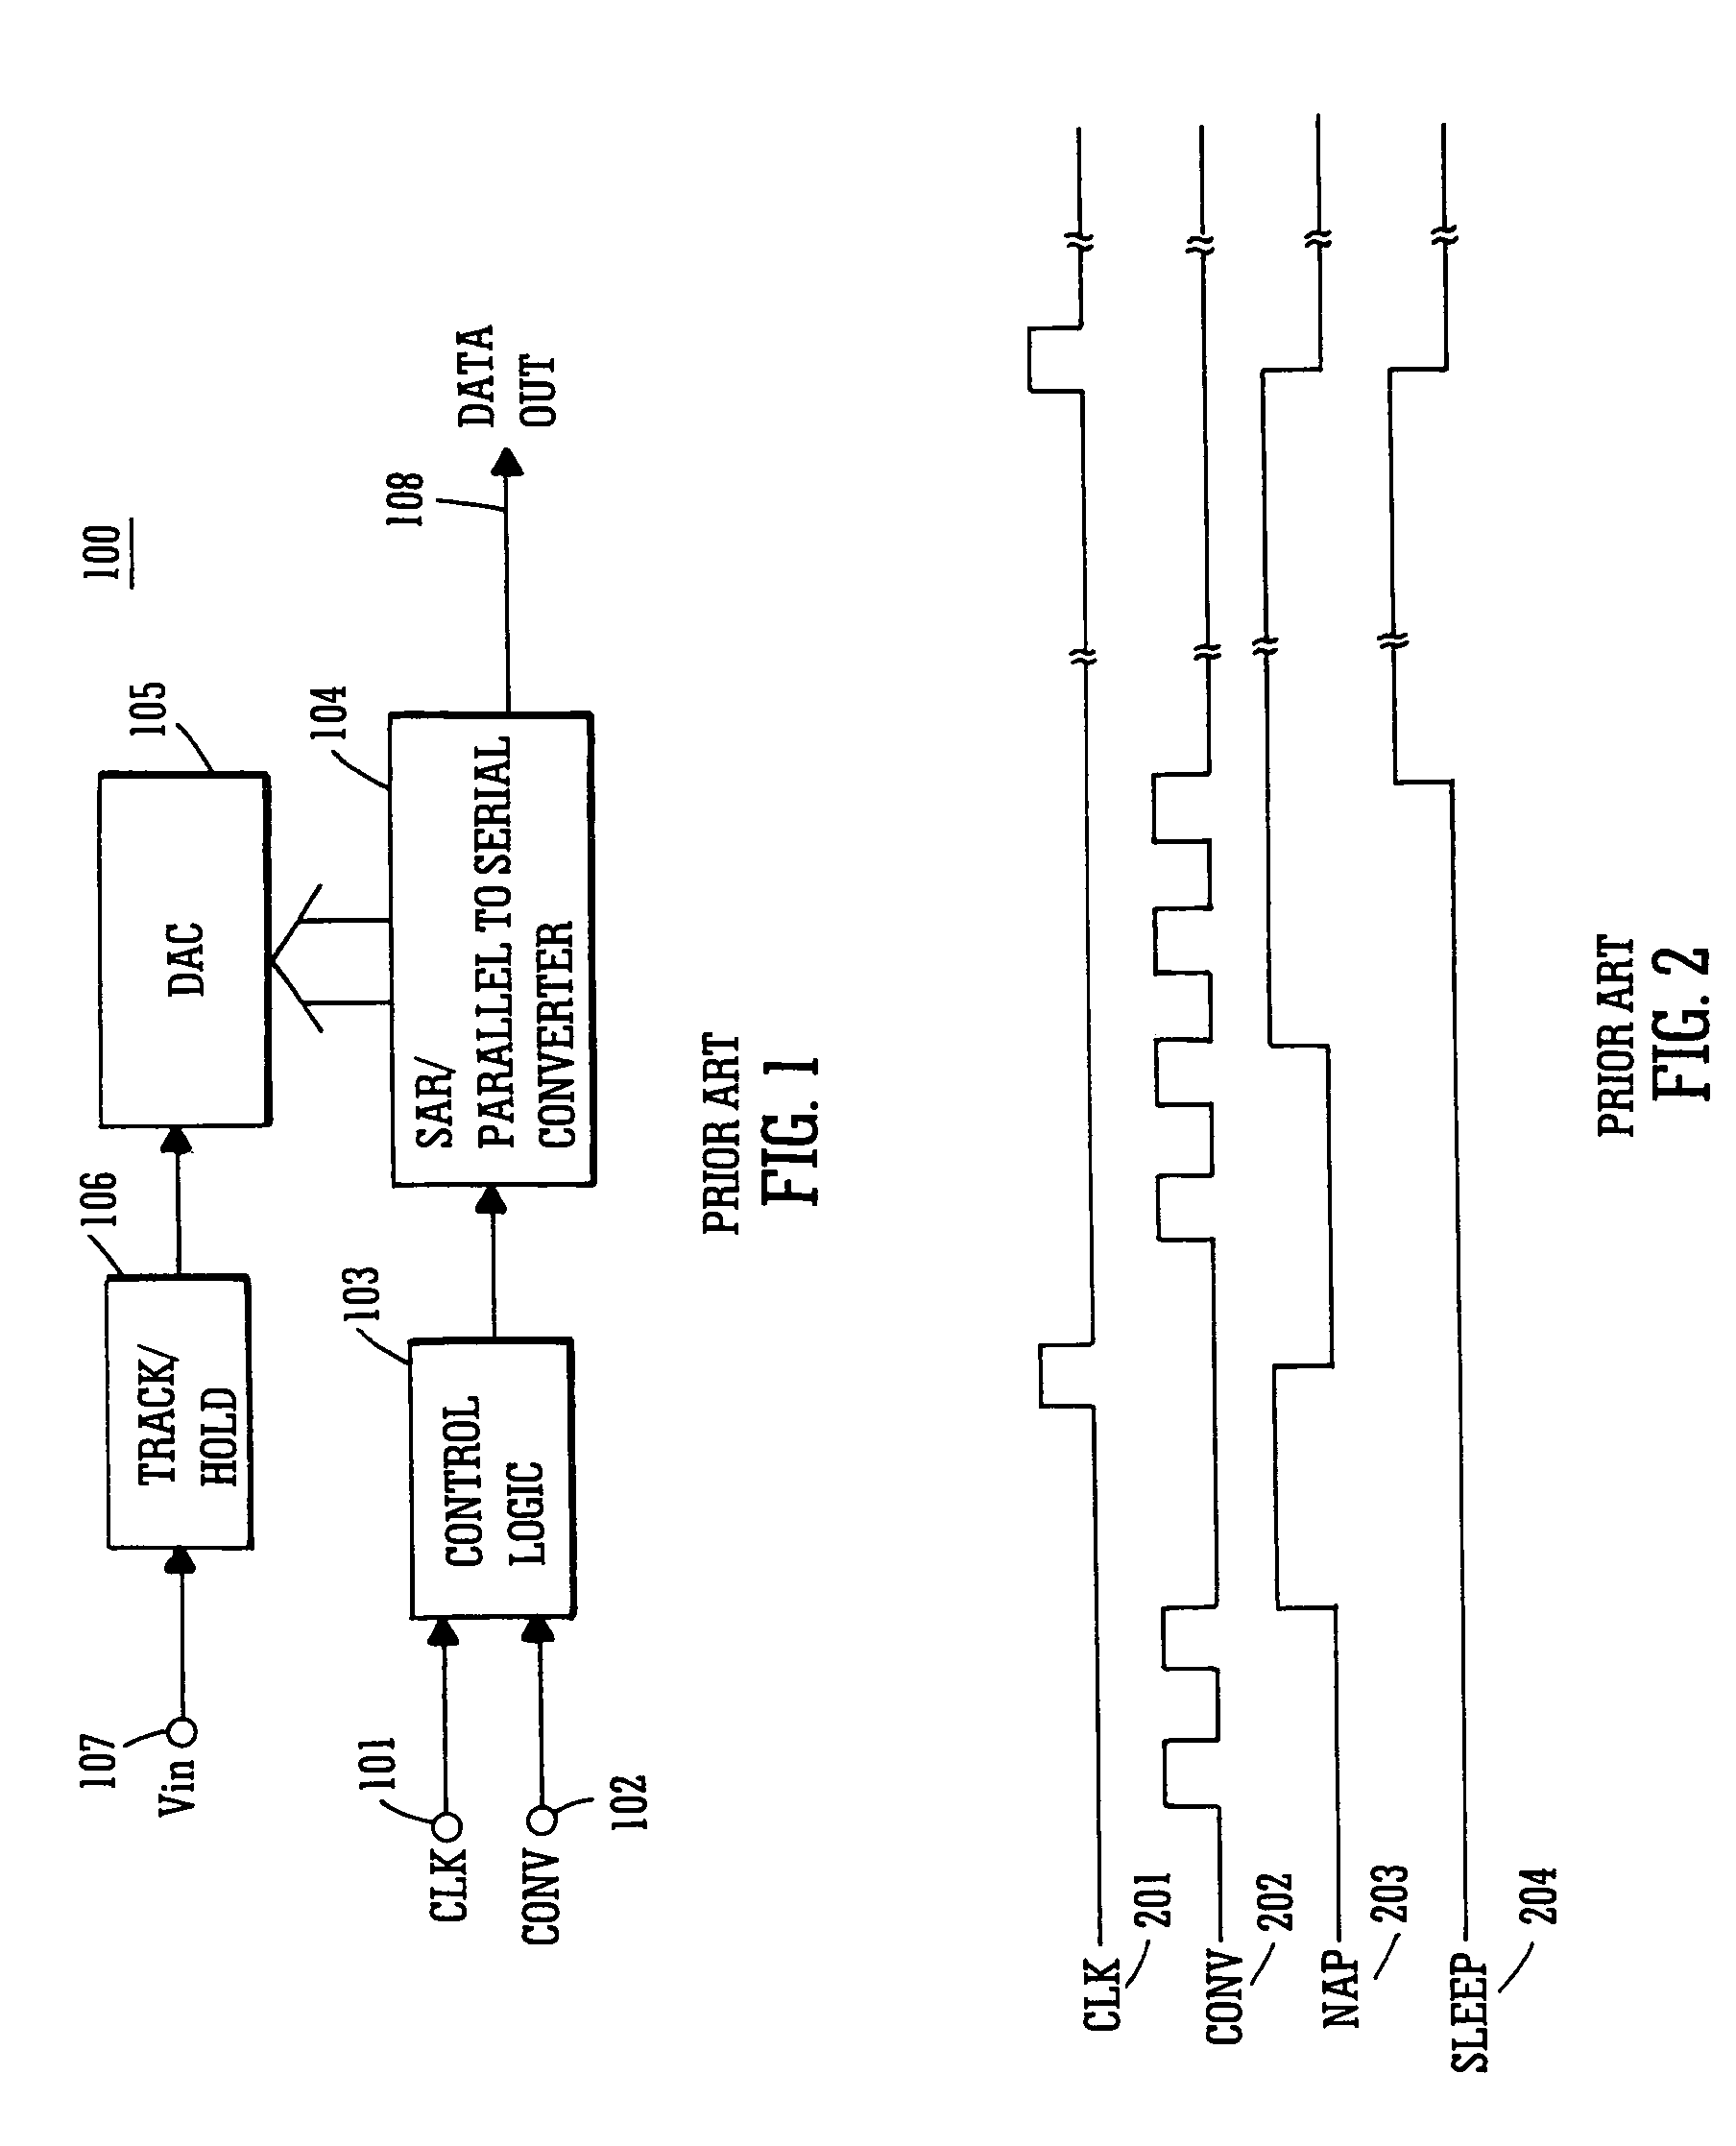 Method for placing a device in a selected mode of operation